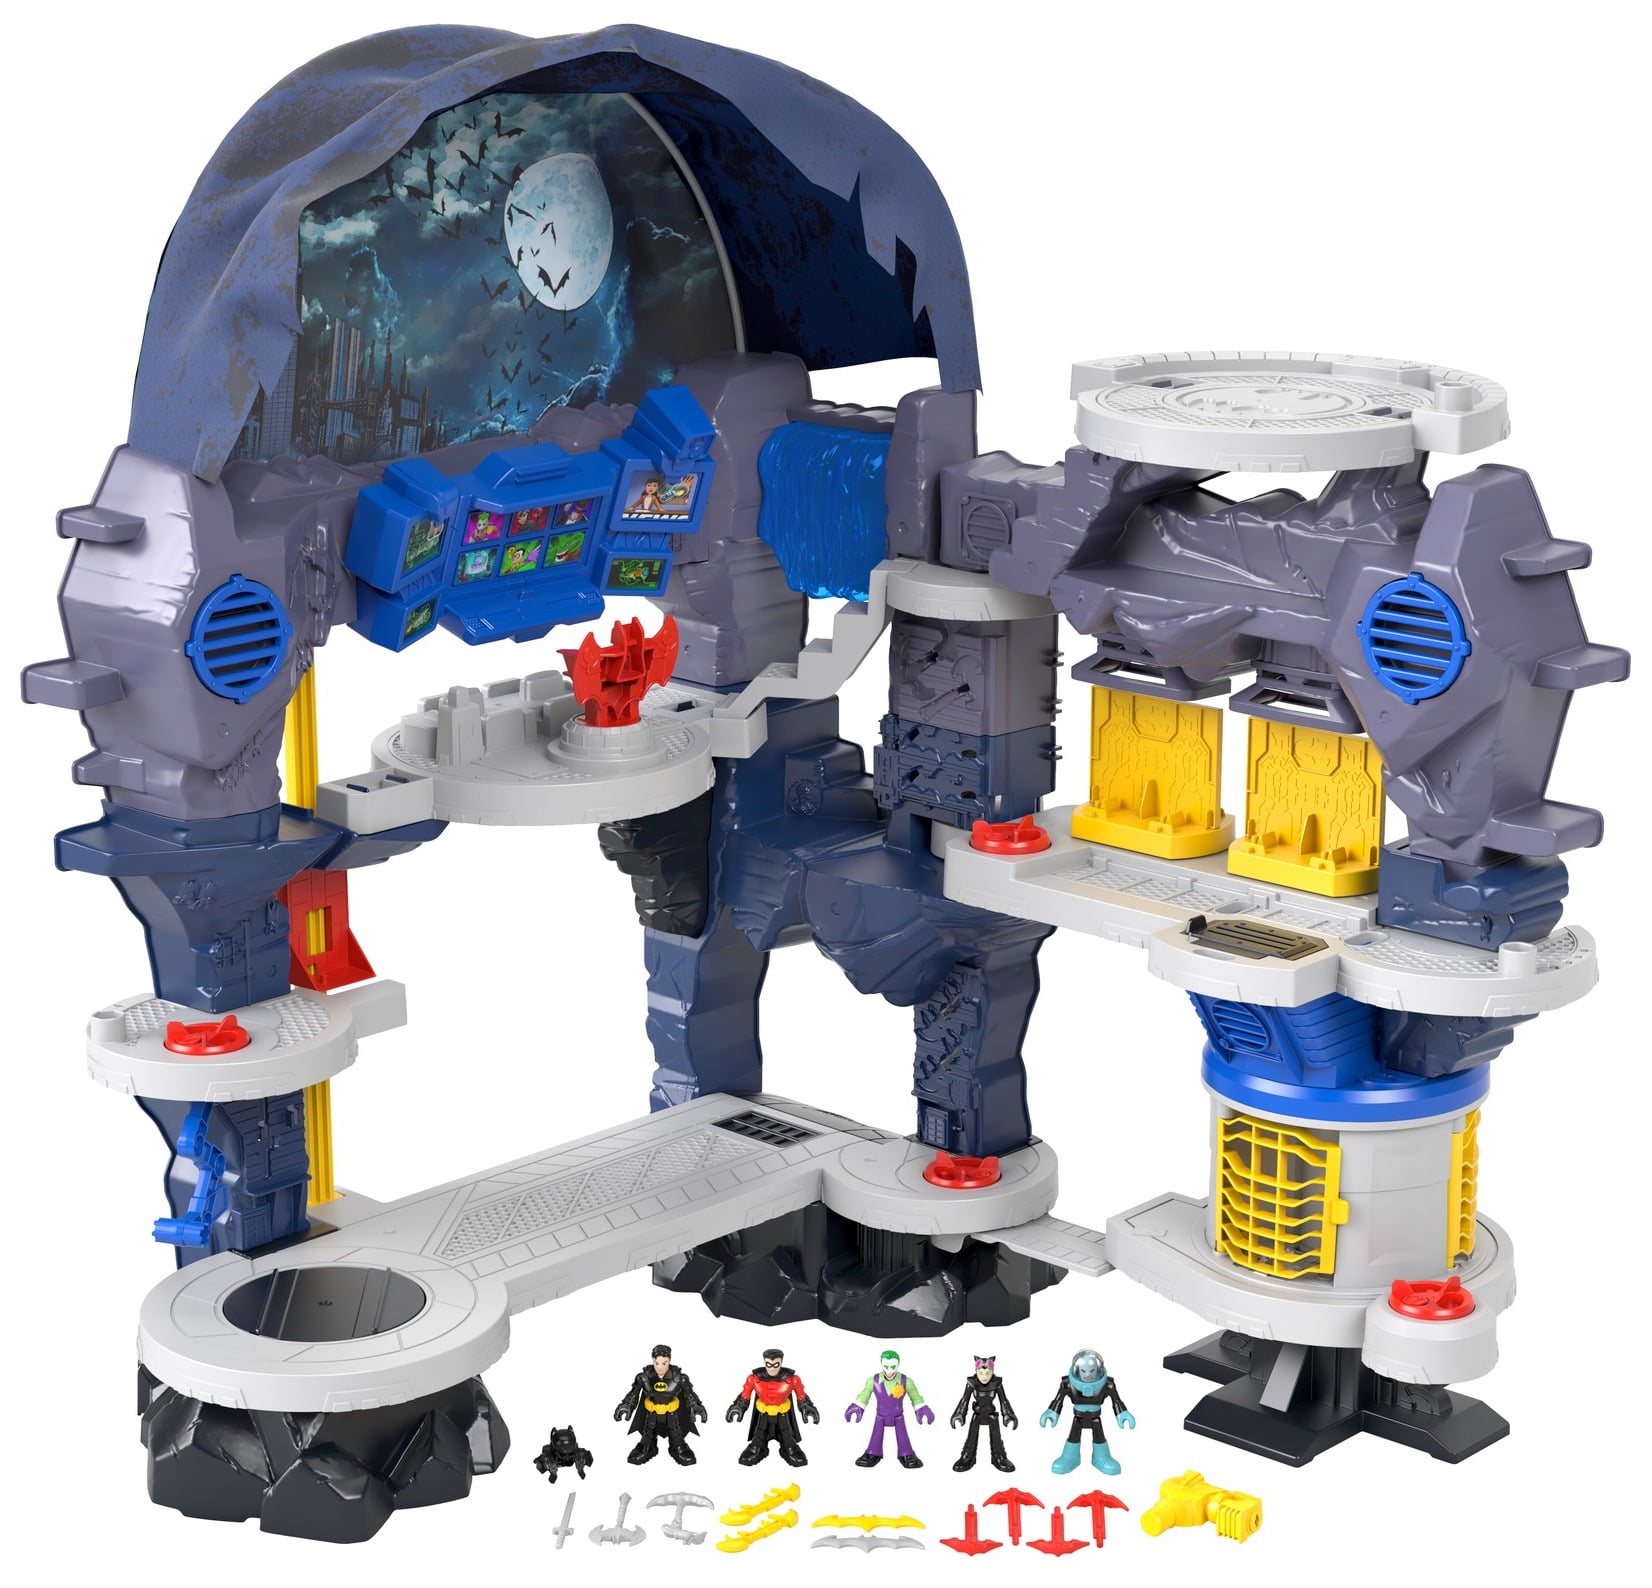 Imaginext part Batman Batcave turntable round table turn around cycle batcycle 